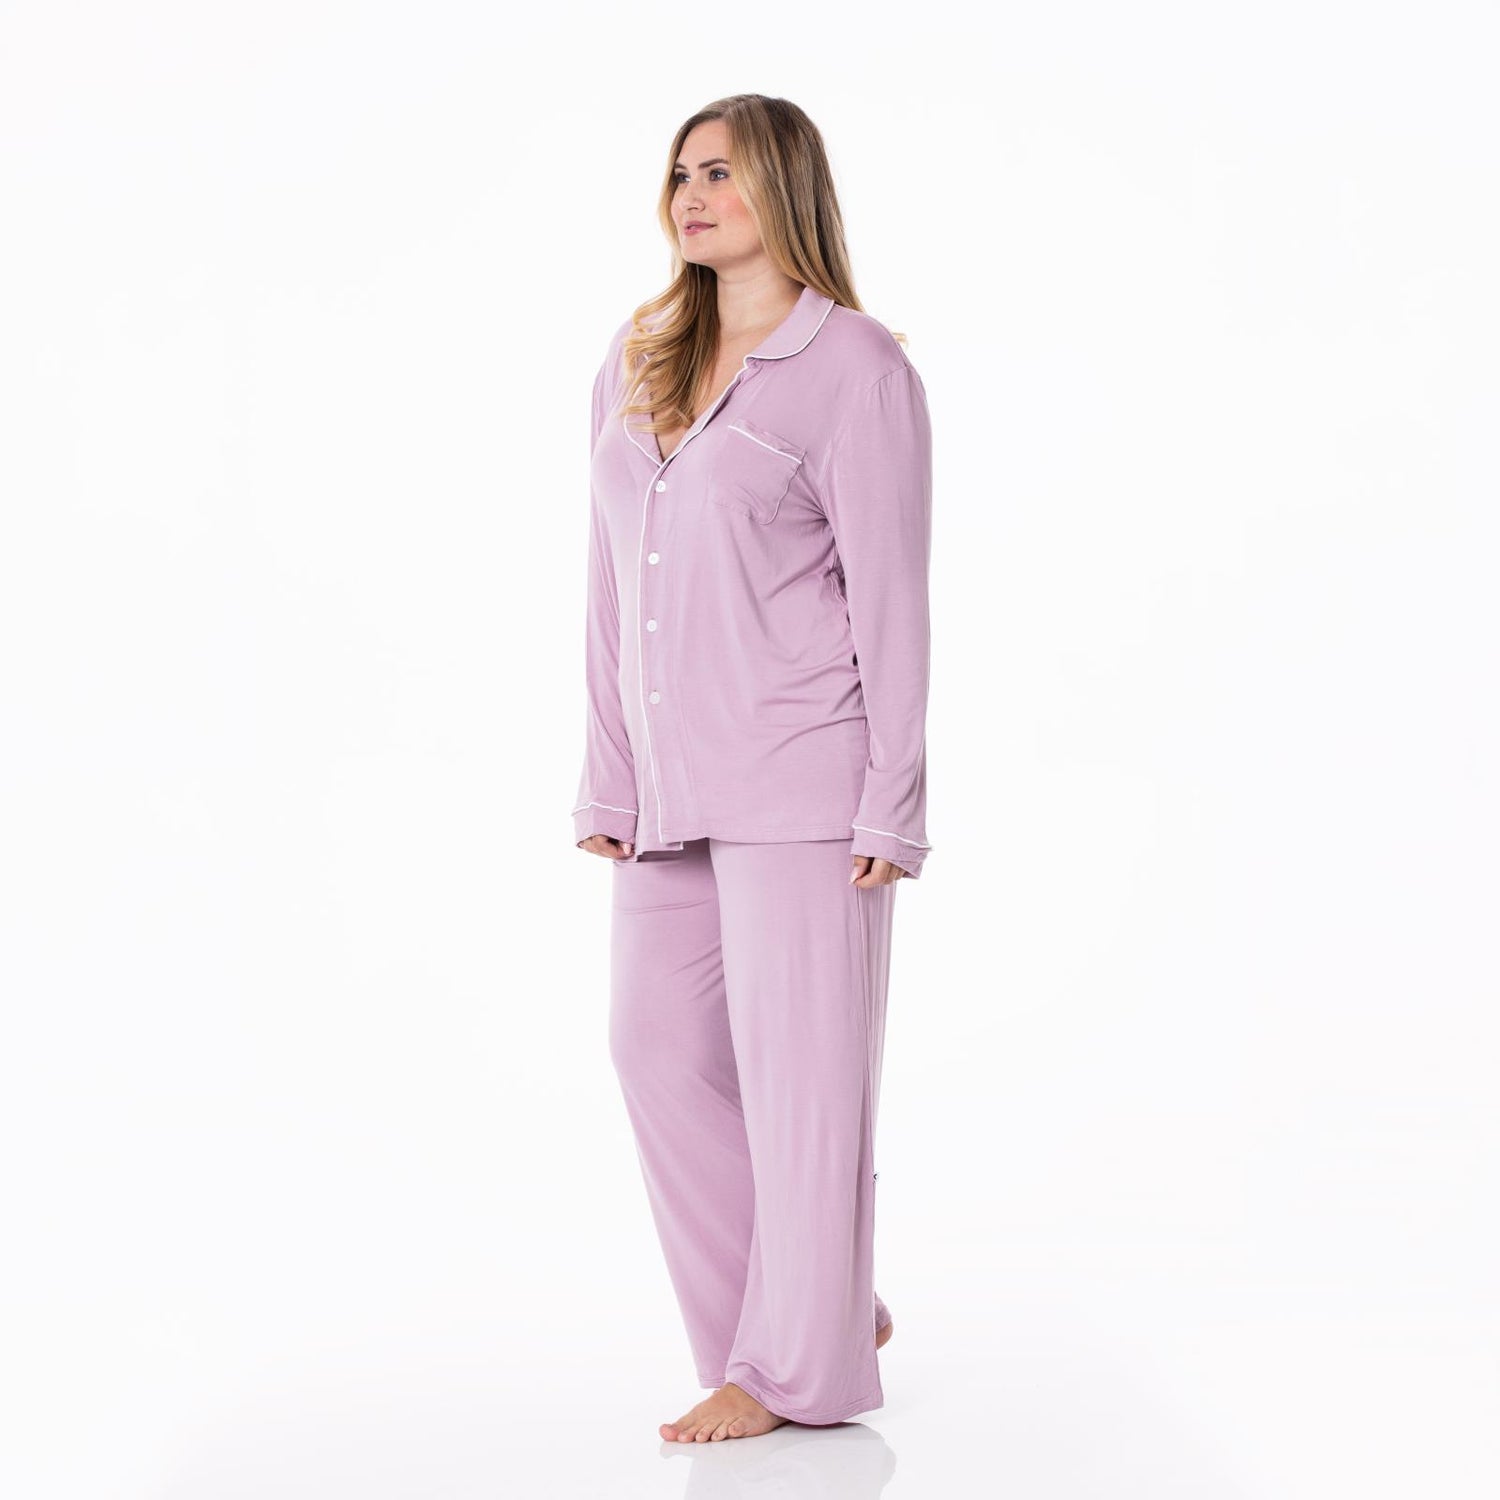 Women's Long Sleeved Collared Pajama Set in Sweet Pea with Natural